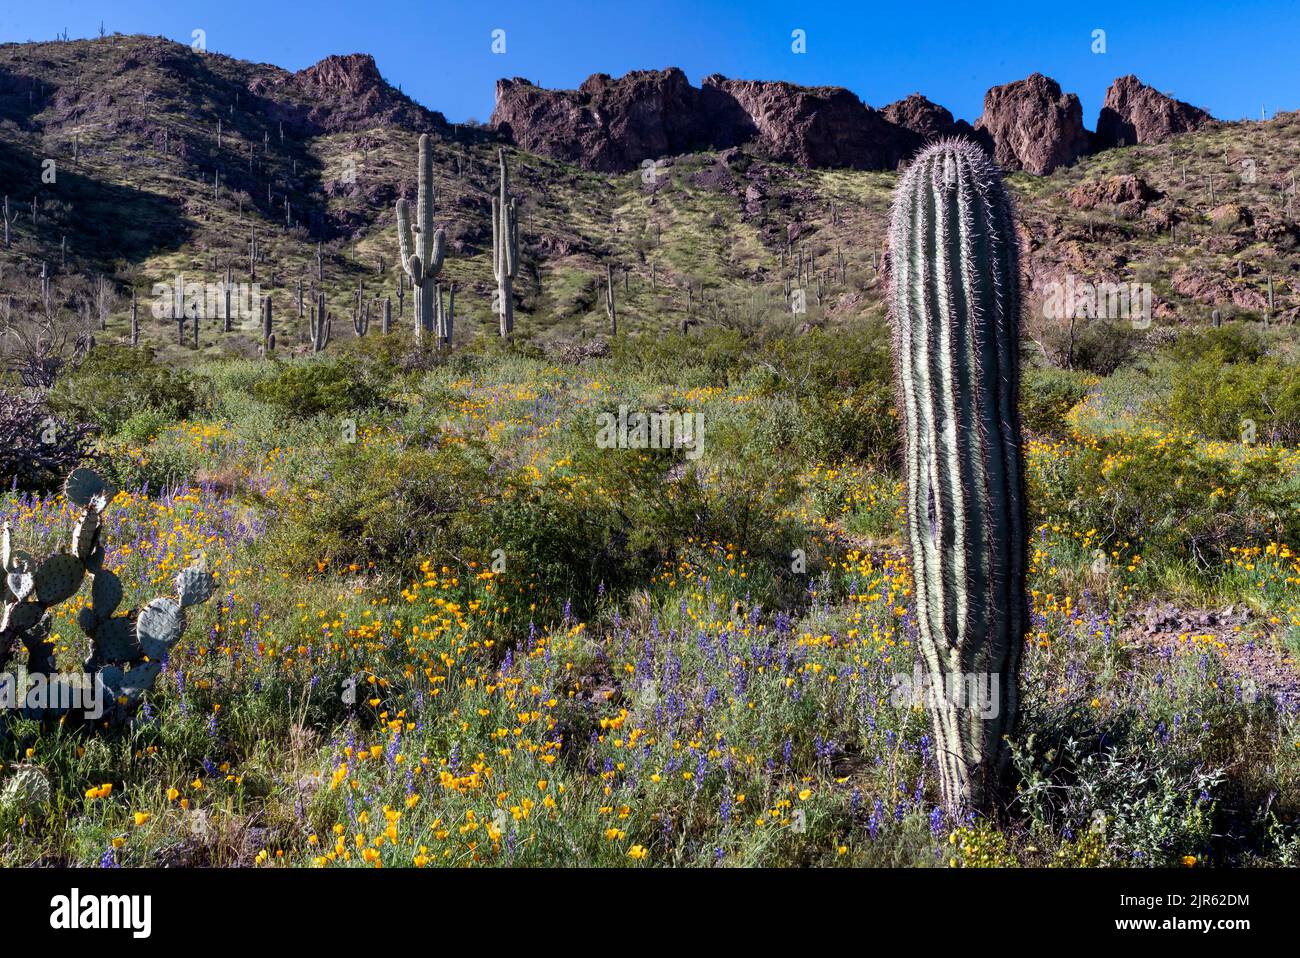 Blooming desert with large population of 'golden poppies' and 'desert lupines' at Picacho Peak State Park (Arizona, USA) in March 2020. Stock Photo